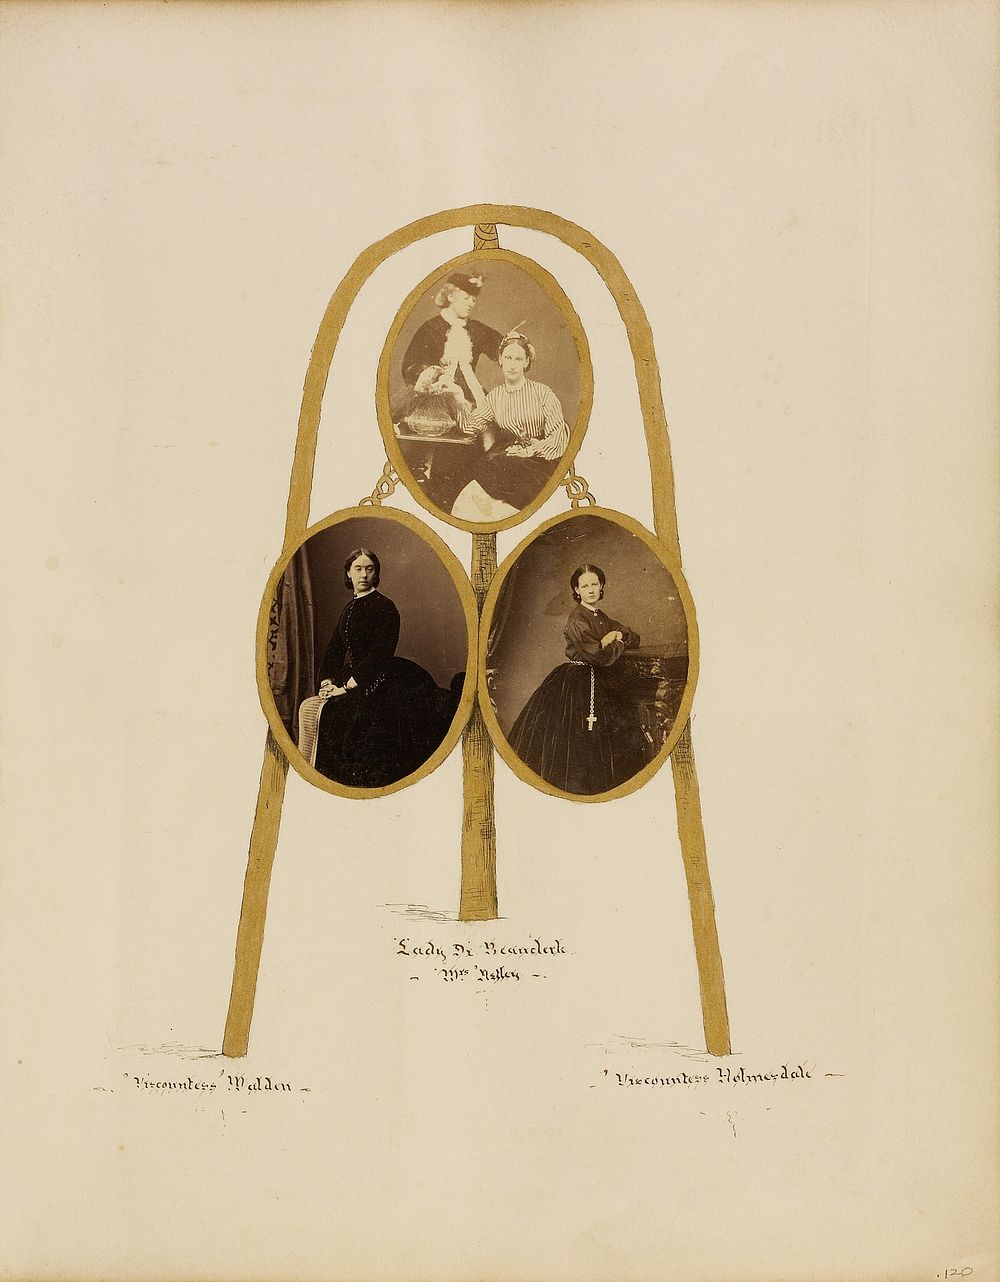 Photo collage including Viscountess Malder, Lady Beauclerk, Mrs. Astley, and Viscountess Holmesdale by Camille Silvy